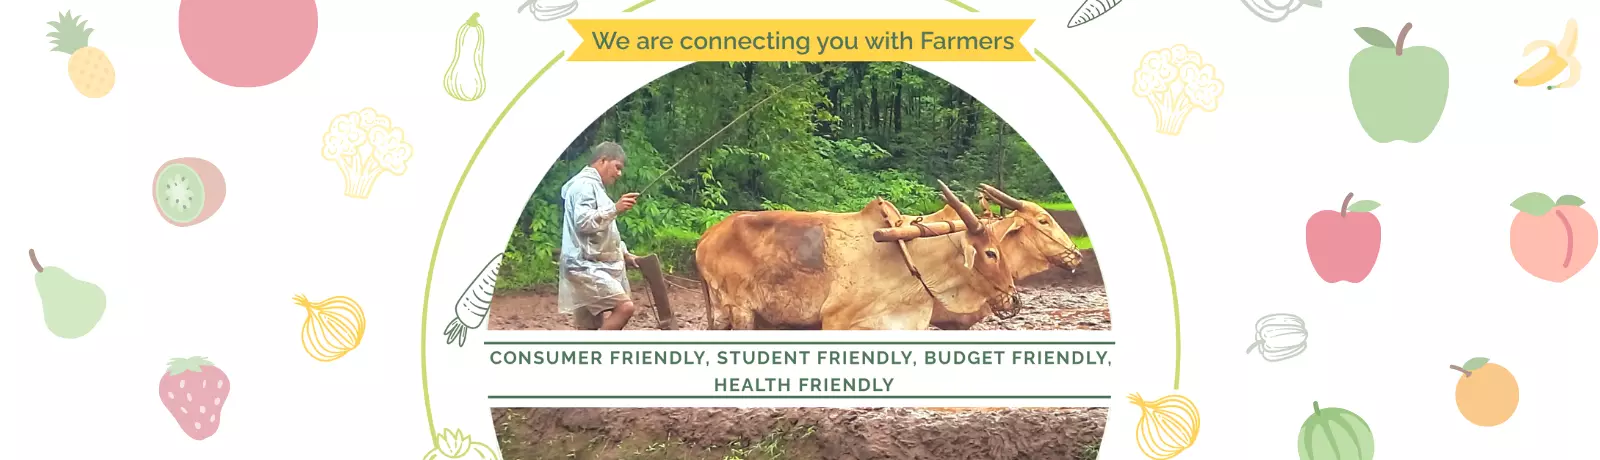 we are connecting you with farmers